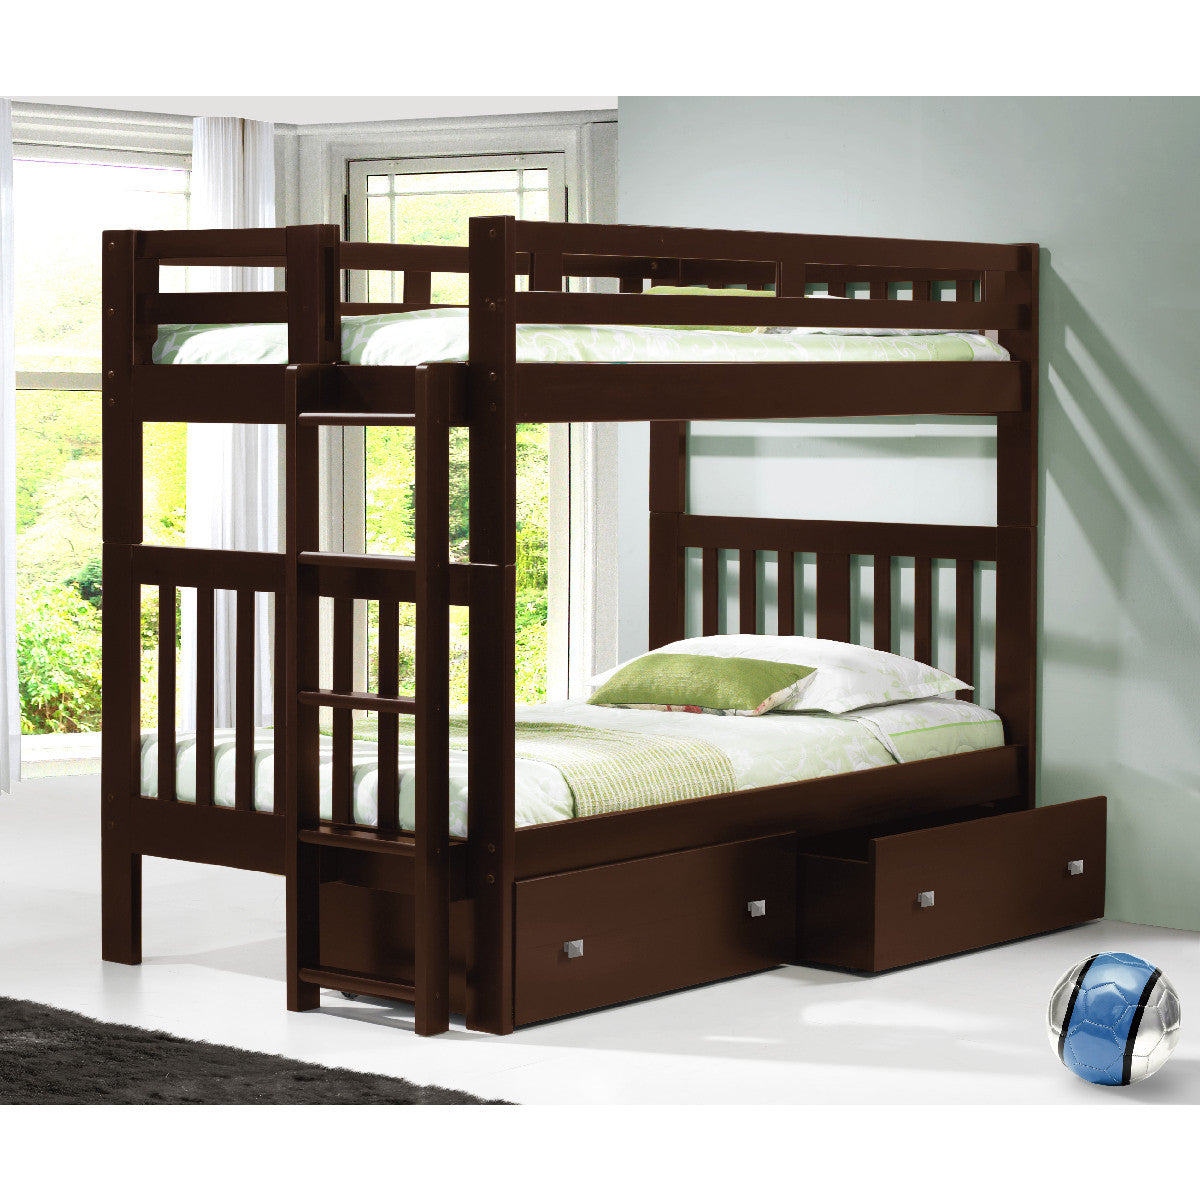 TWIN/TWIN MISSION BUNK BED WITH DUAL UNDERBED DRAWERS DARK CAPPUCCINO FINISH